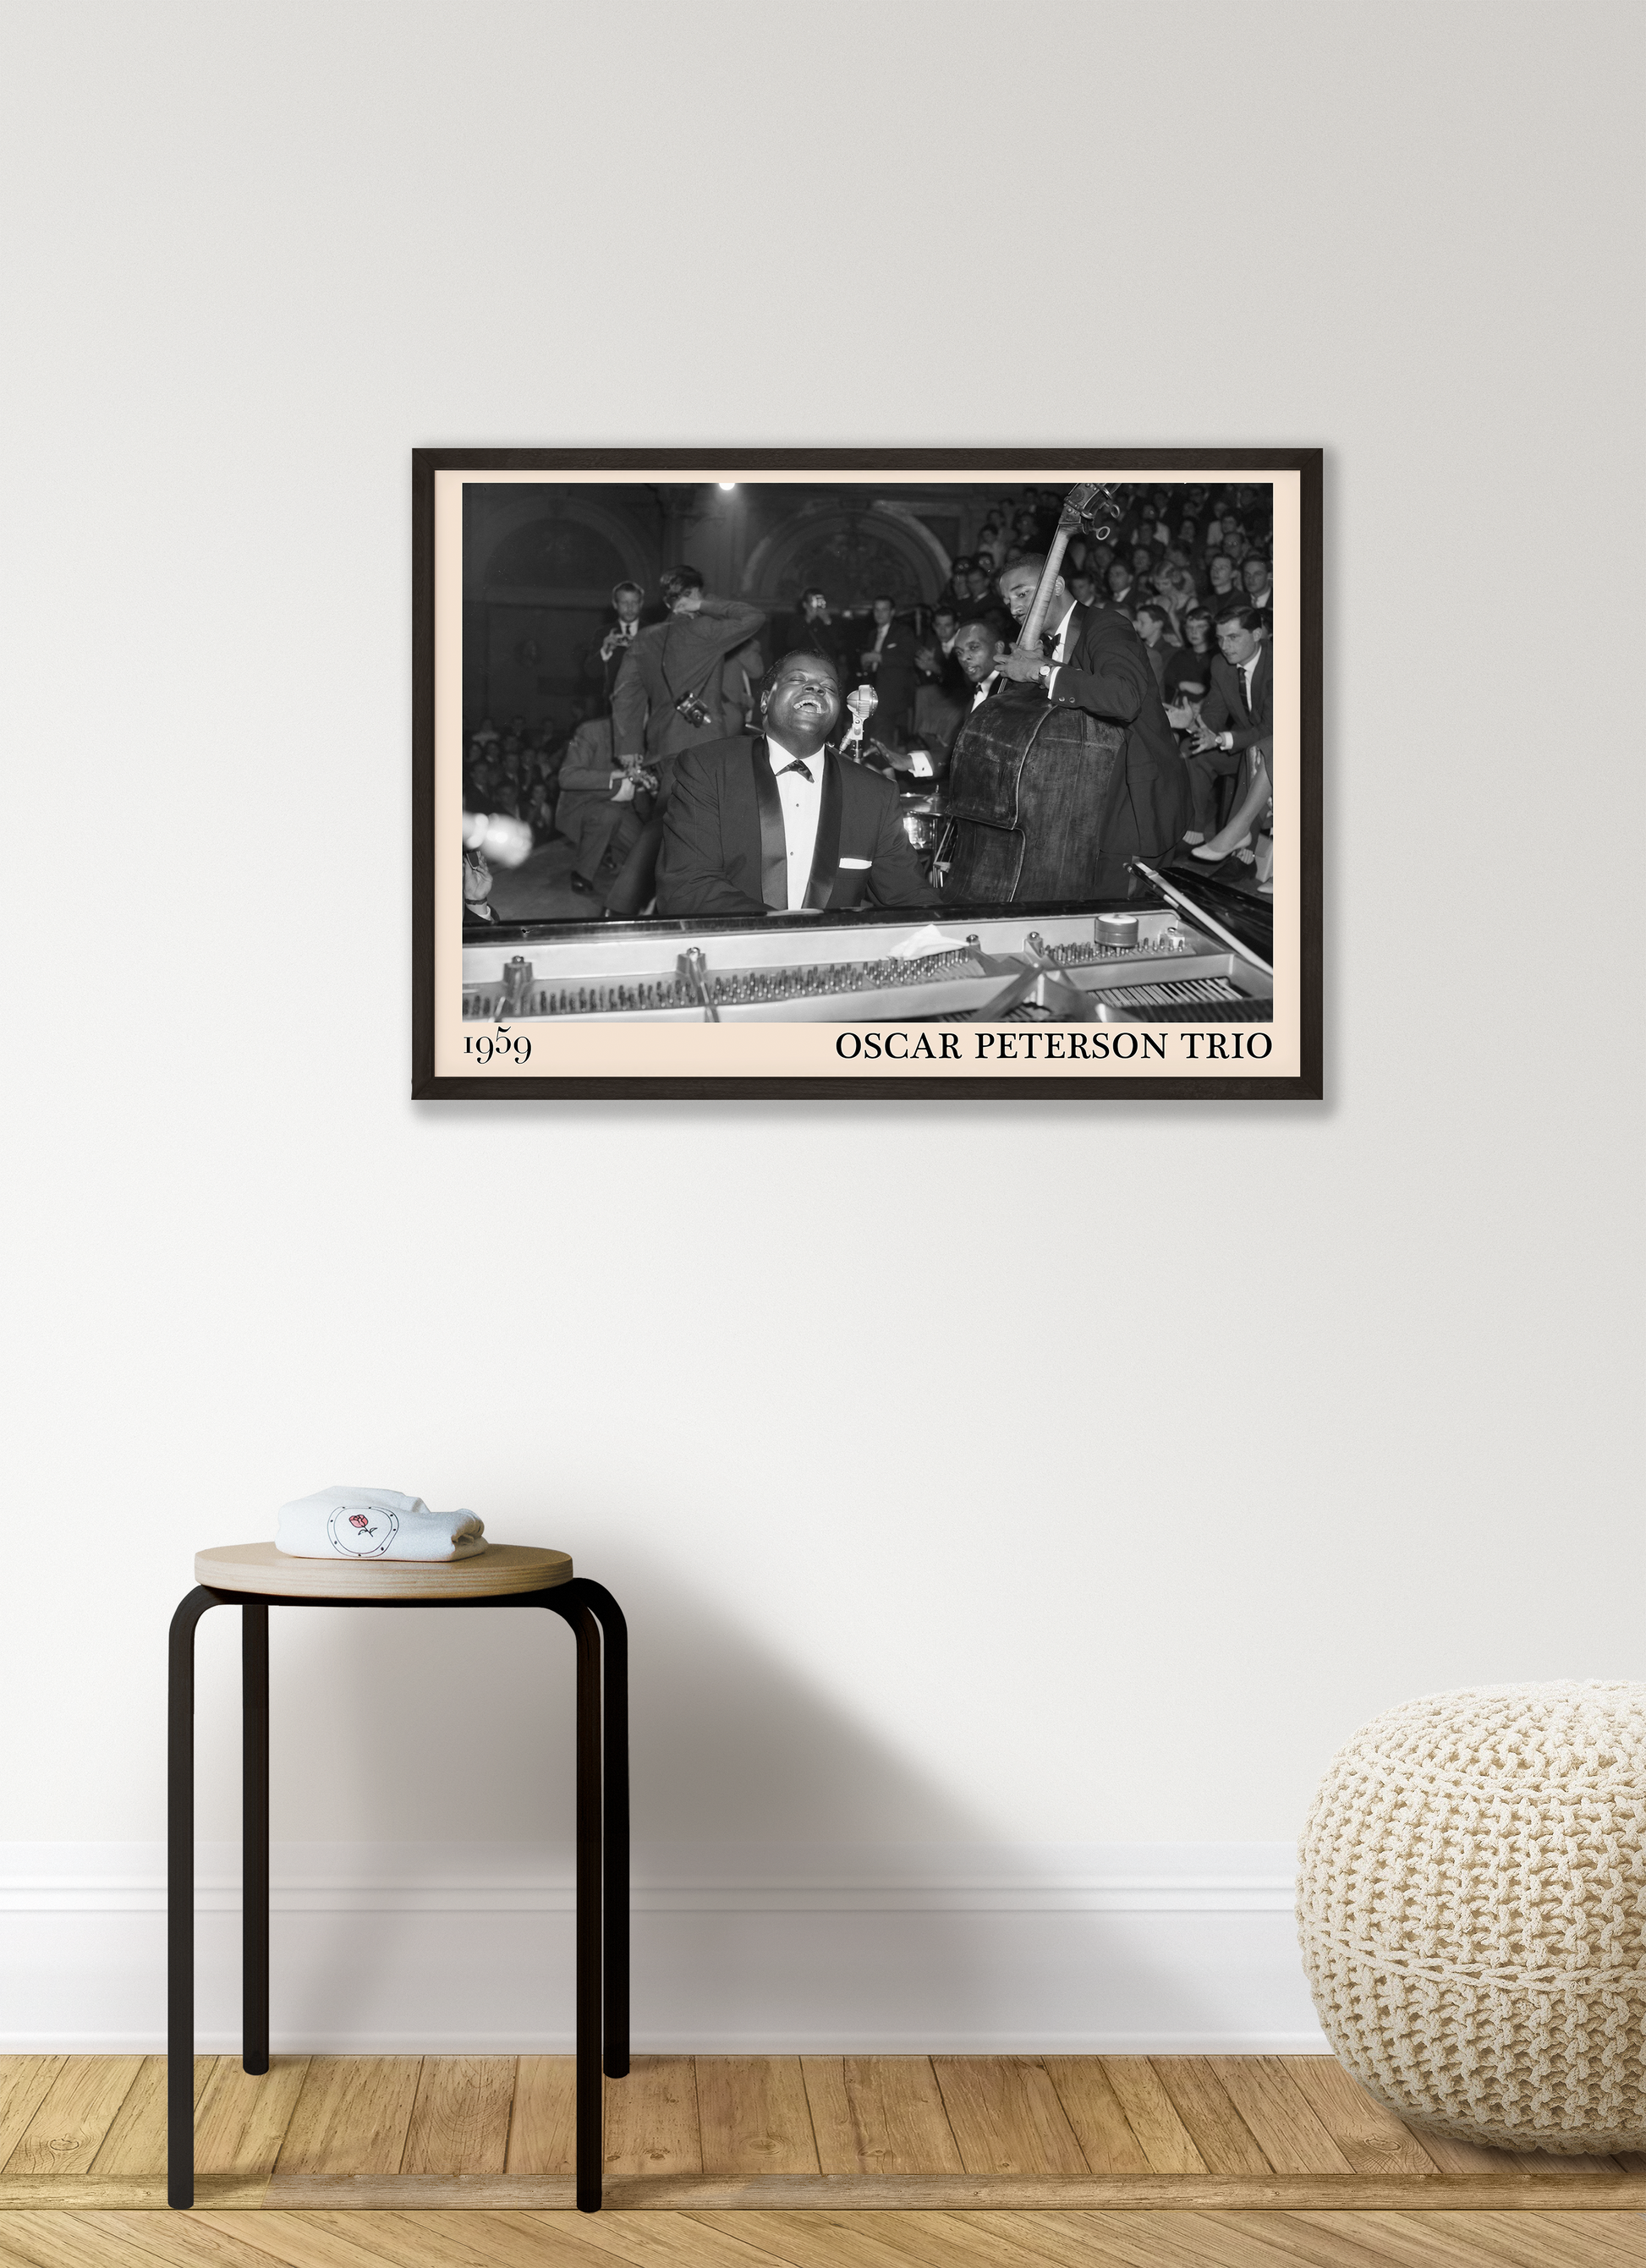 1959 picture of the Oscar Peterson Trio. Picture crafted into a retro black framed jazz print, with an off-white border. Poster is hanging on a grey living wall